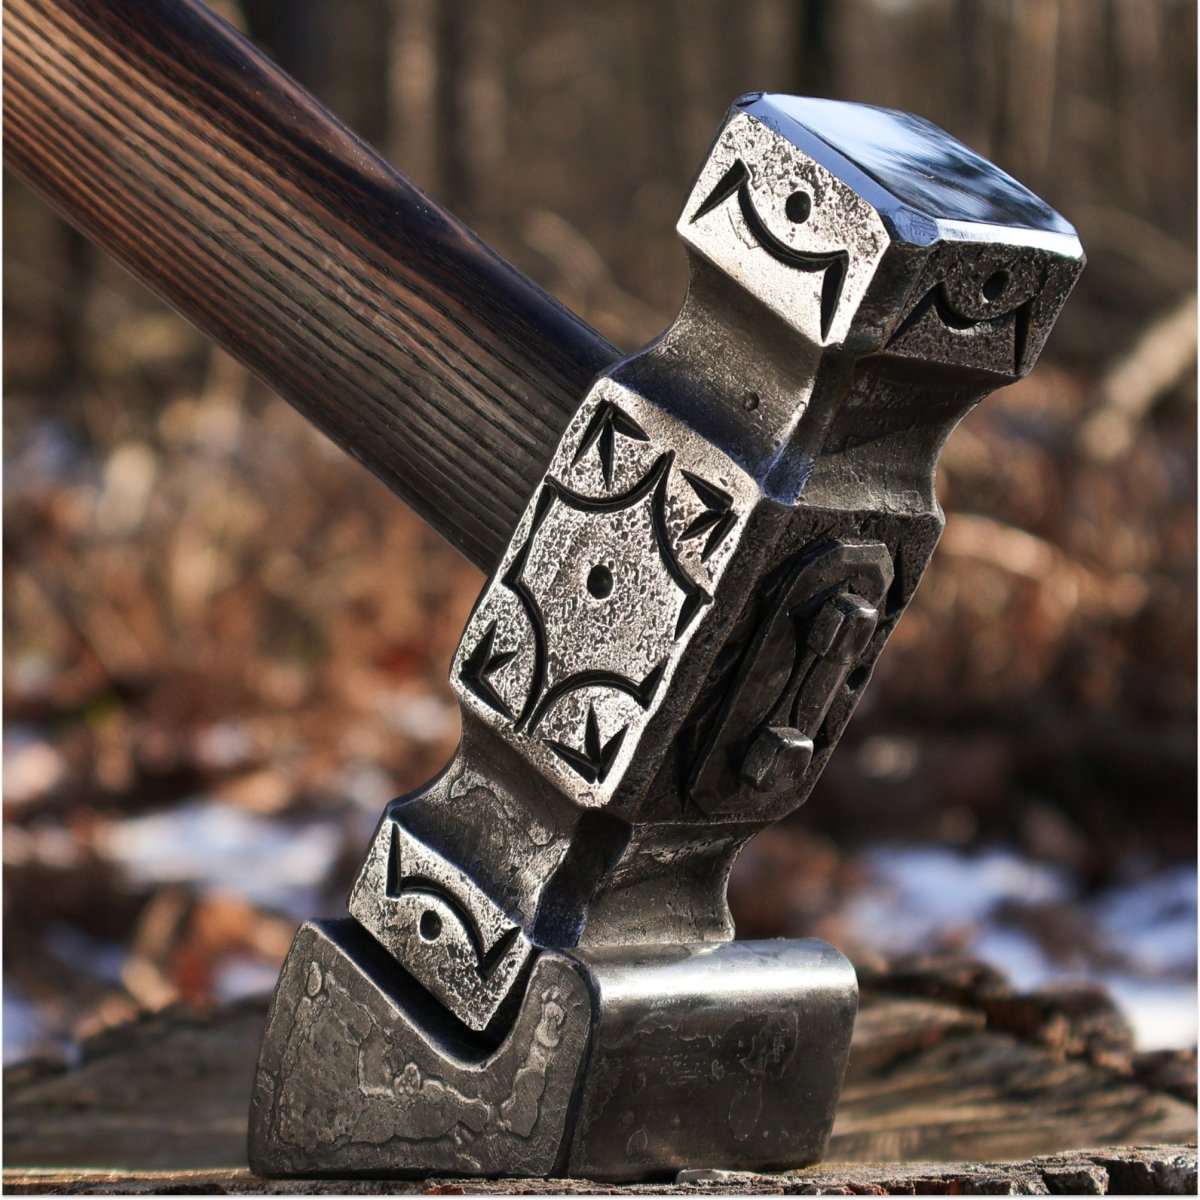 Unique custom hammer "Odin" from AncientSmithy